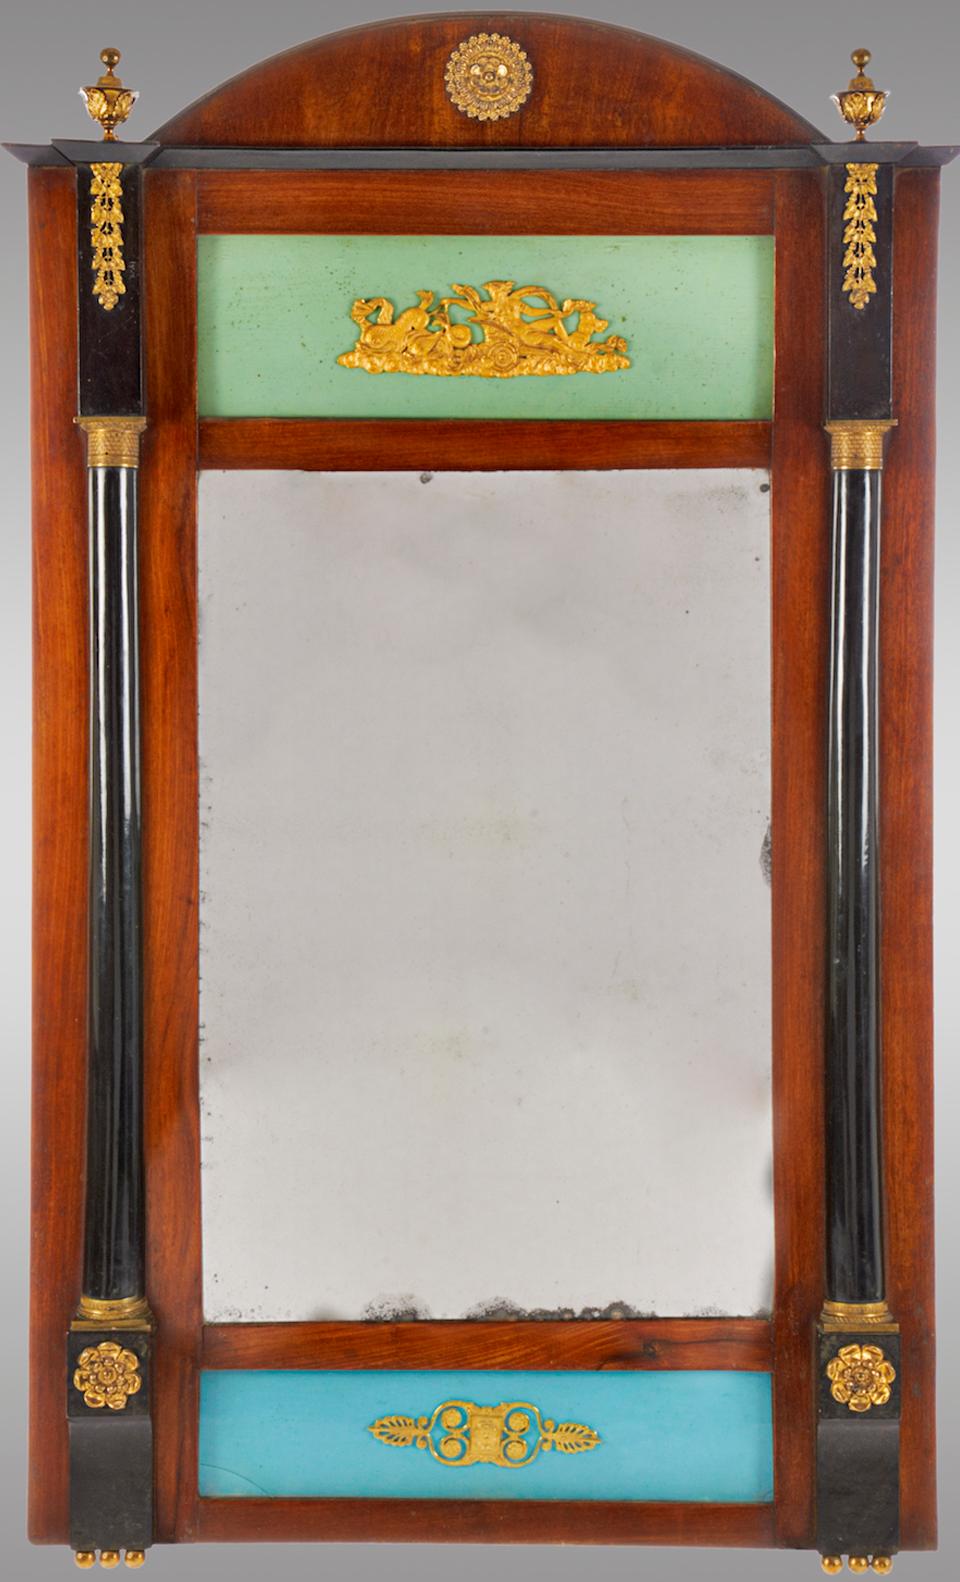 This antique trumeau was designed during the Ferdinand VII period and manufactured during the early 19th century. The mirror features a mahogany frame with ormolu details. In very good antique condition with minor wear consistent with age and use.